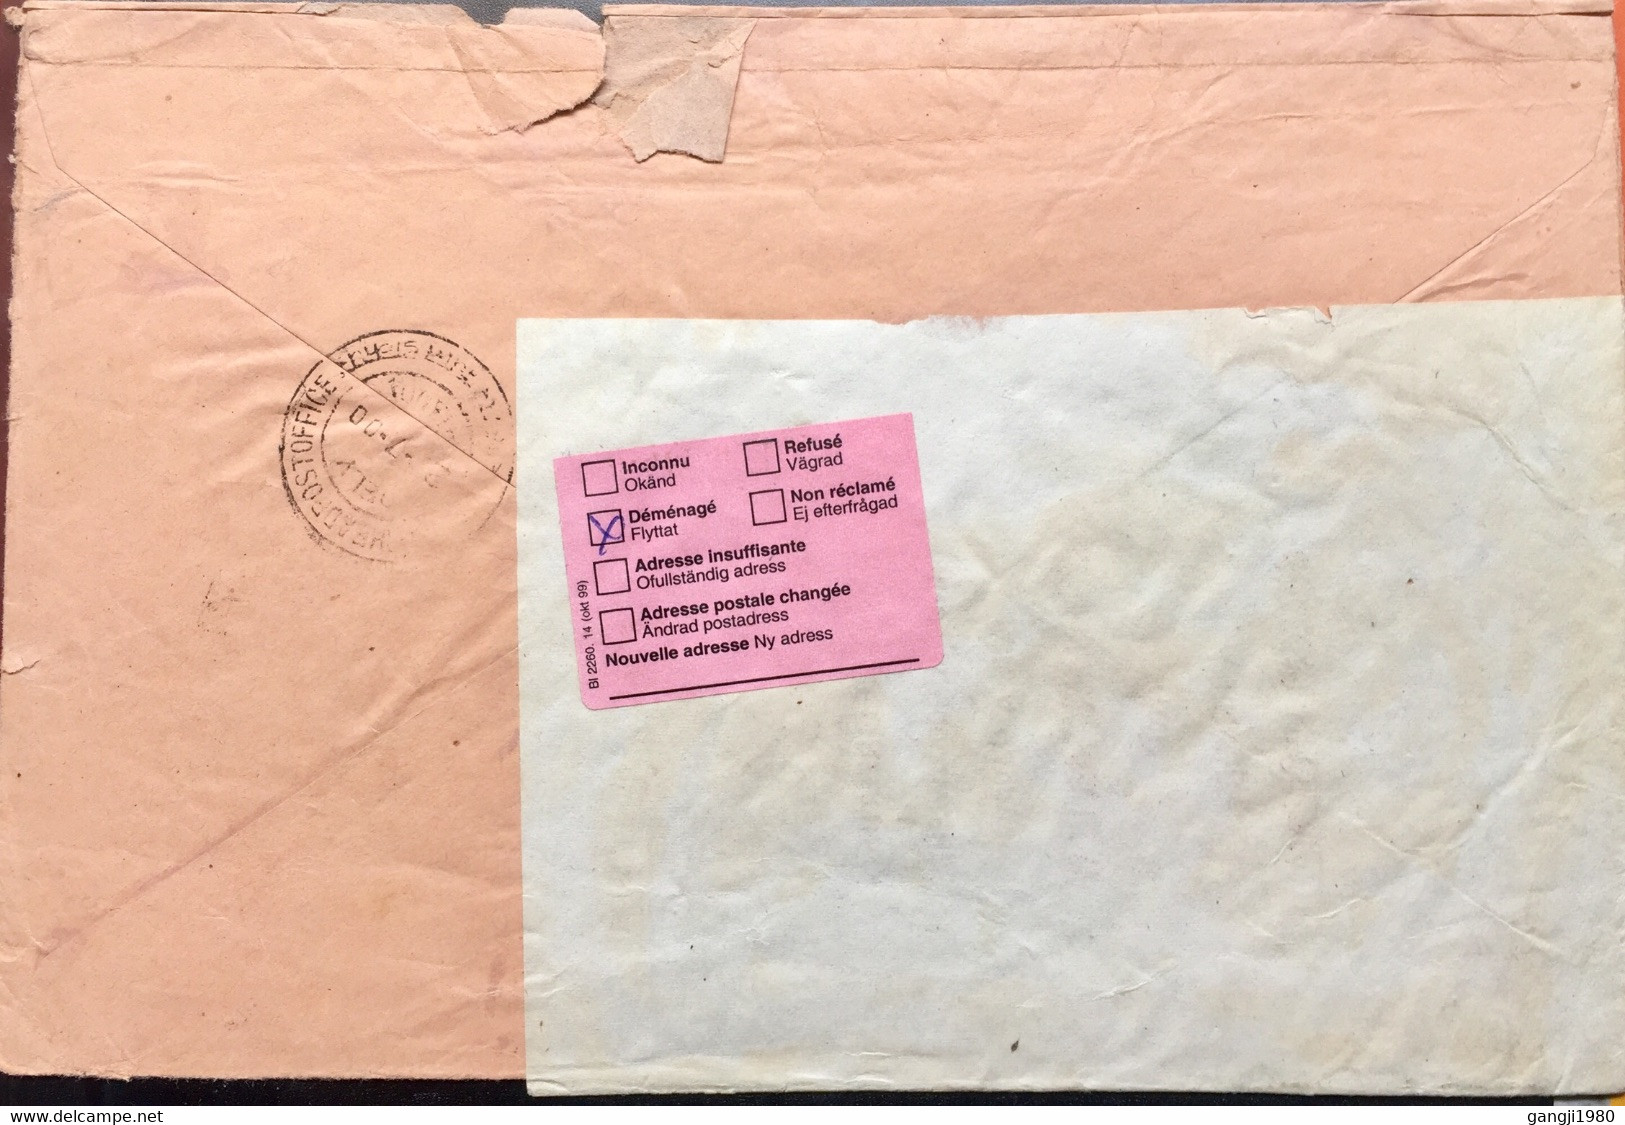 LUXEMBOURG 2000, AIRMAIL USED COVER TO SWEDEN RETURN TO SENDER VIGNETTE 2 DIFFERENT PINK LABELS - Storia Postale